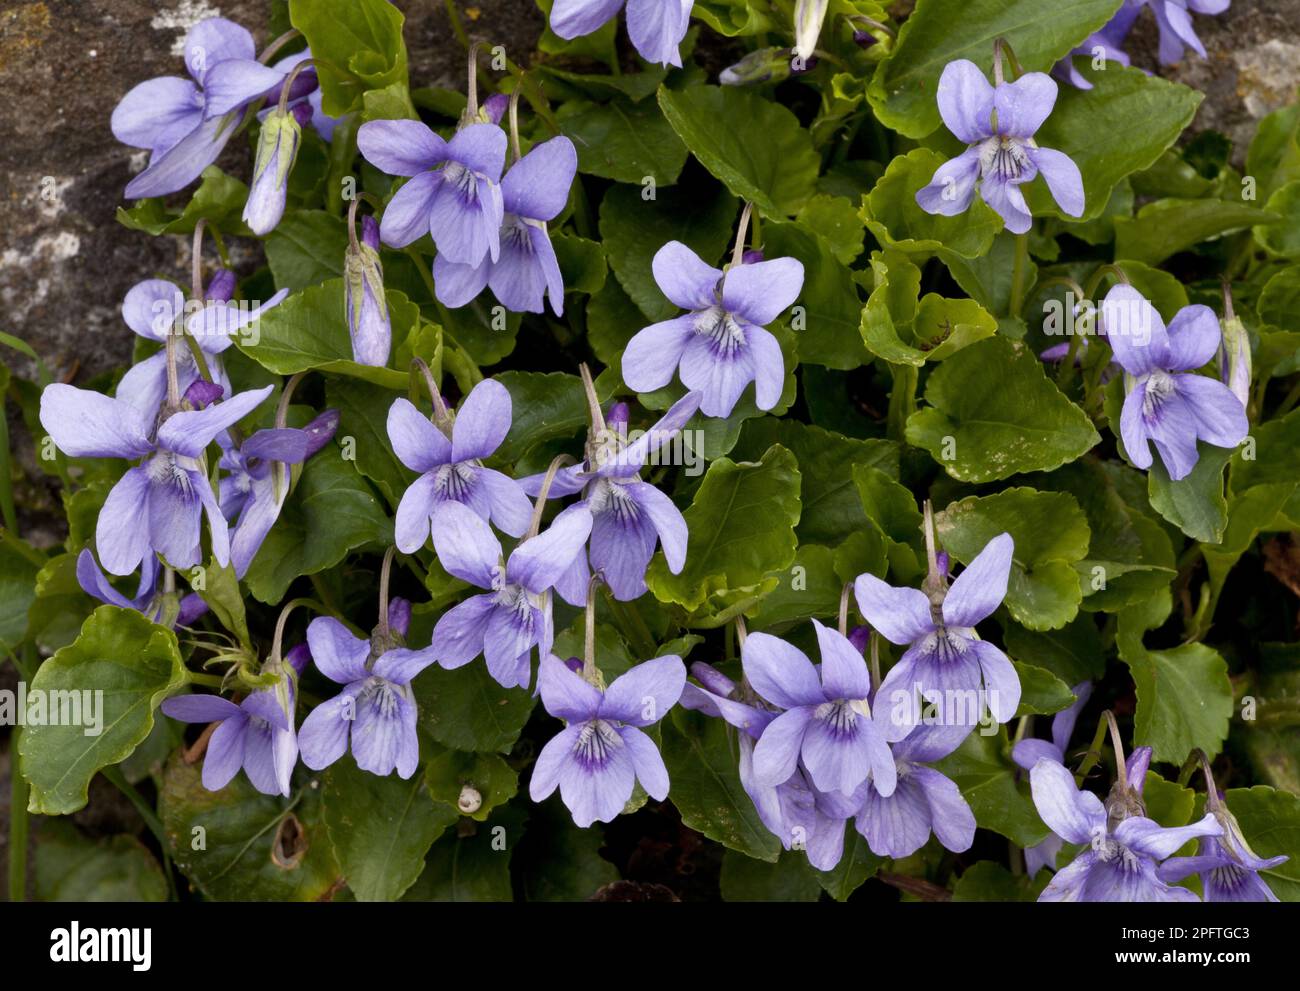 Early Dog-violet (Viola reichenbachiana) flowering, growing in woodland, Greece Stock Photo